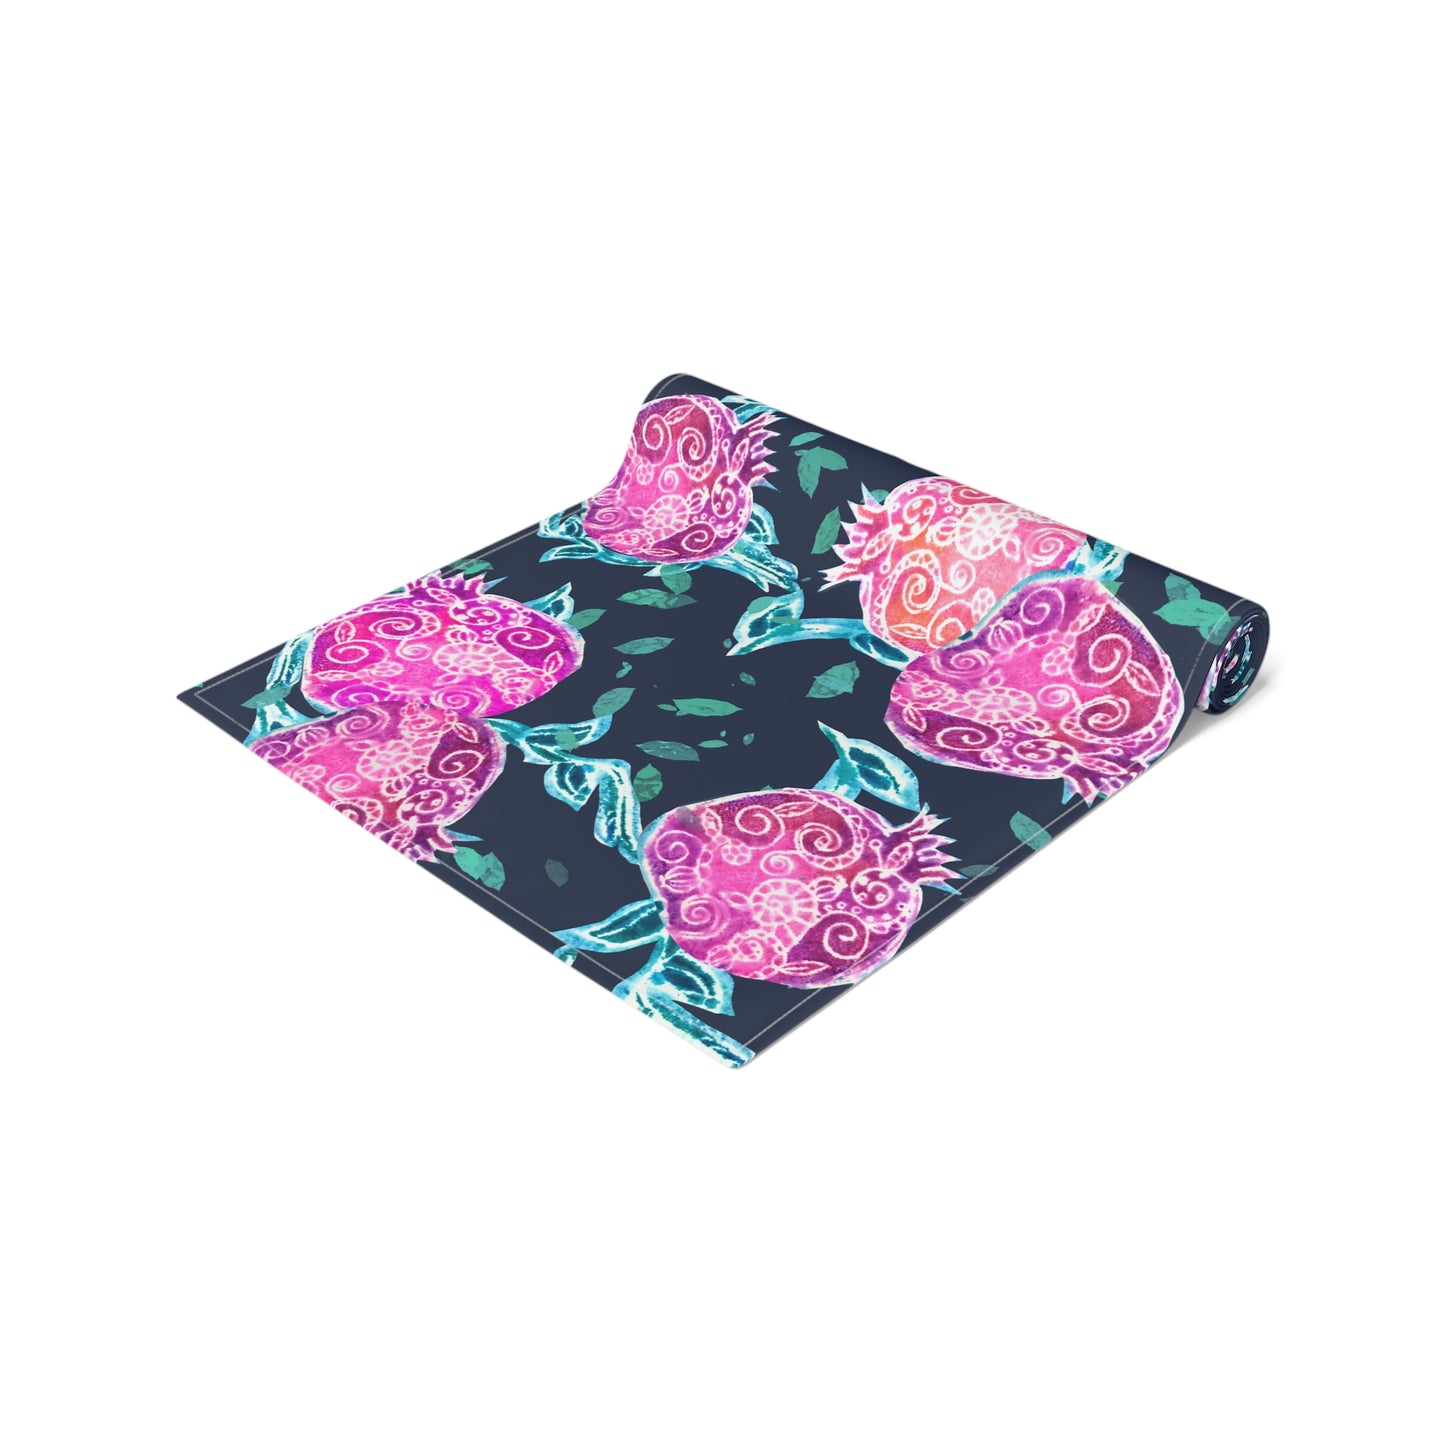 “Pomegranate Whimsy” by Leah Luria Table Runner (Cotton, Poly)